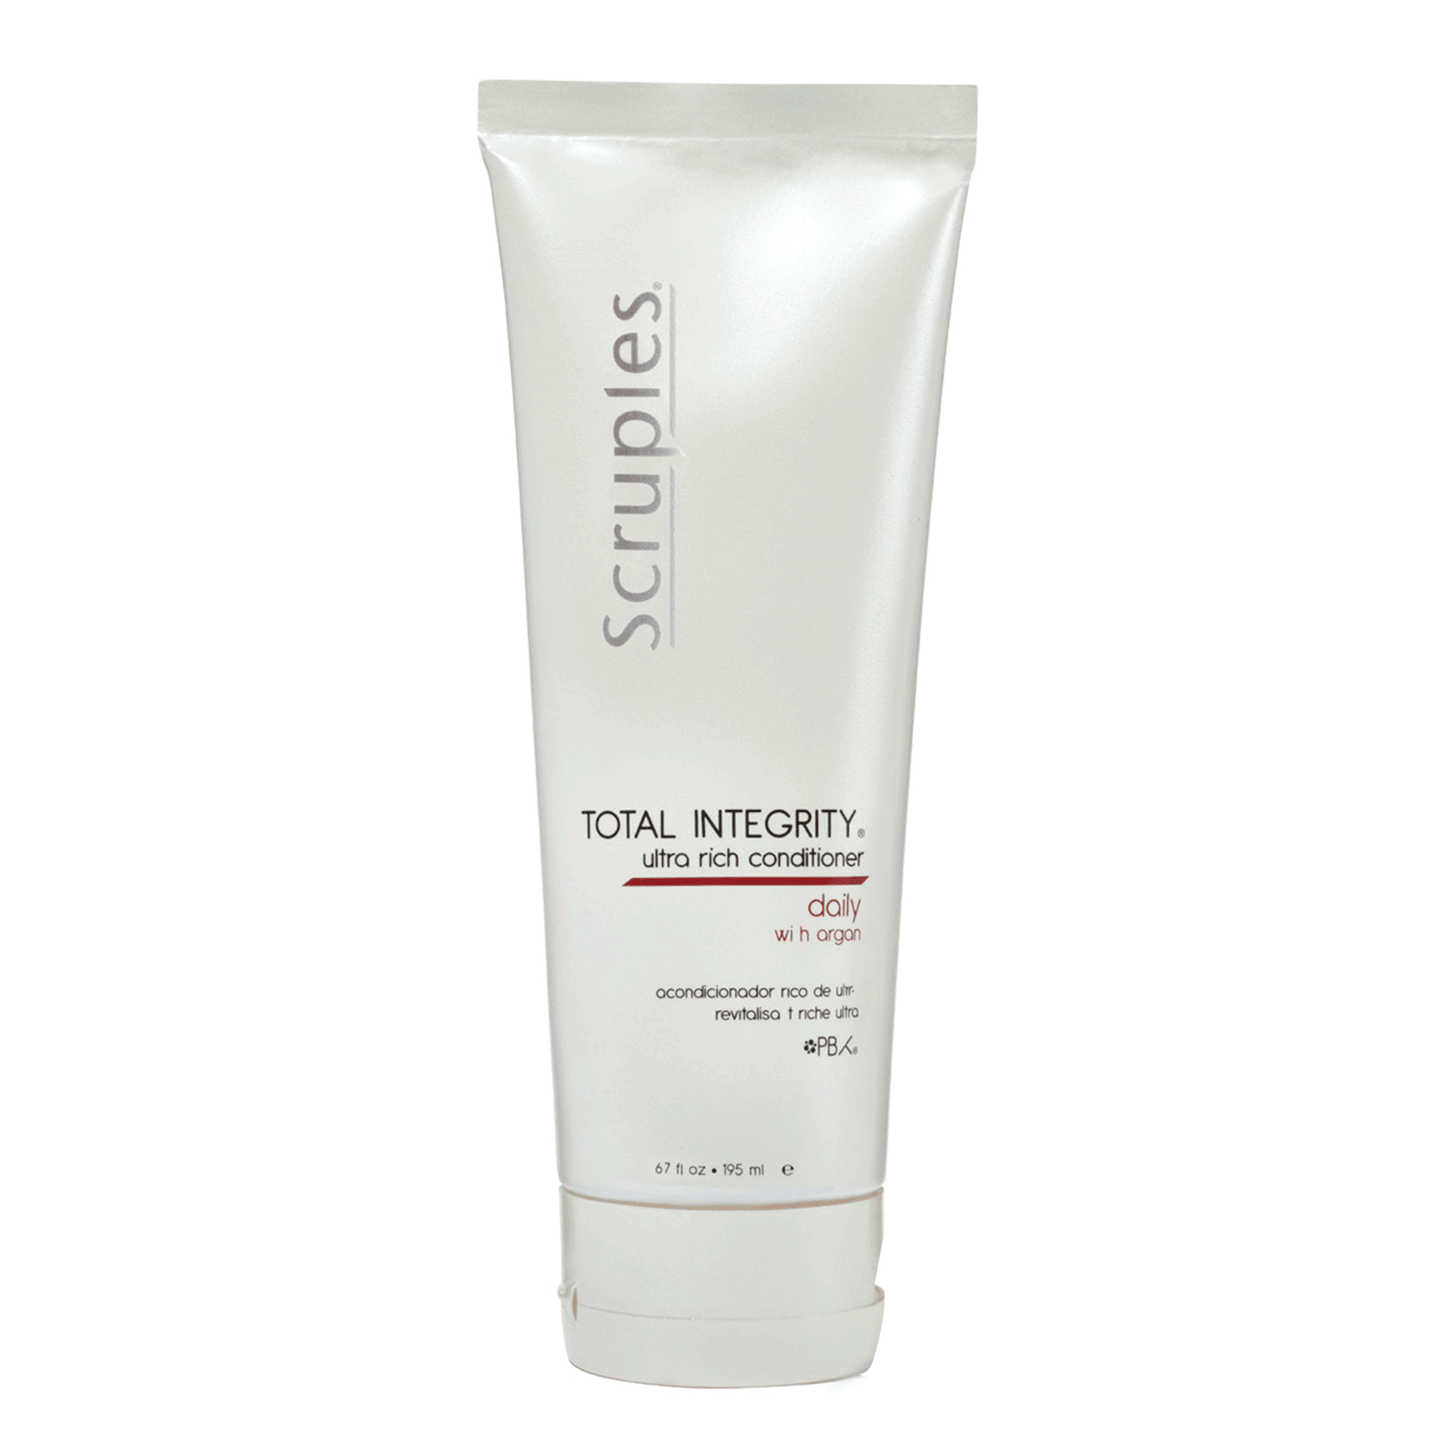 Scruples Total Integrity Ultra Rich Conditioner